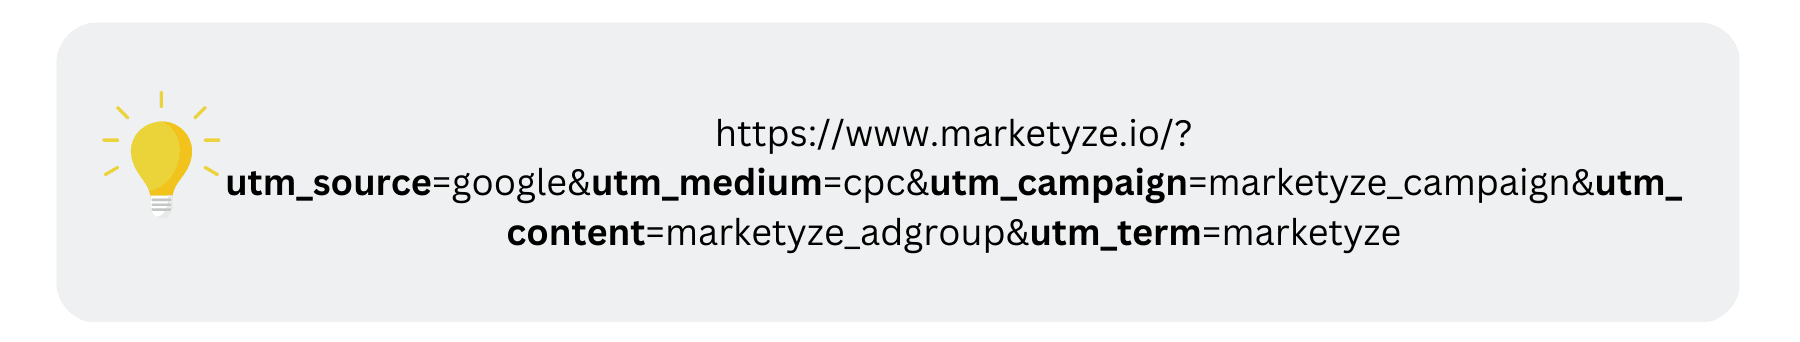 URL with UTM tracking example from Marketyze.